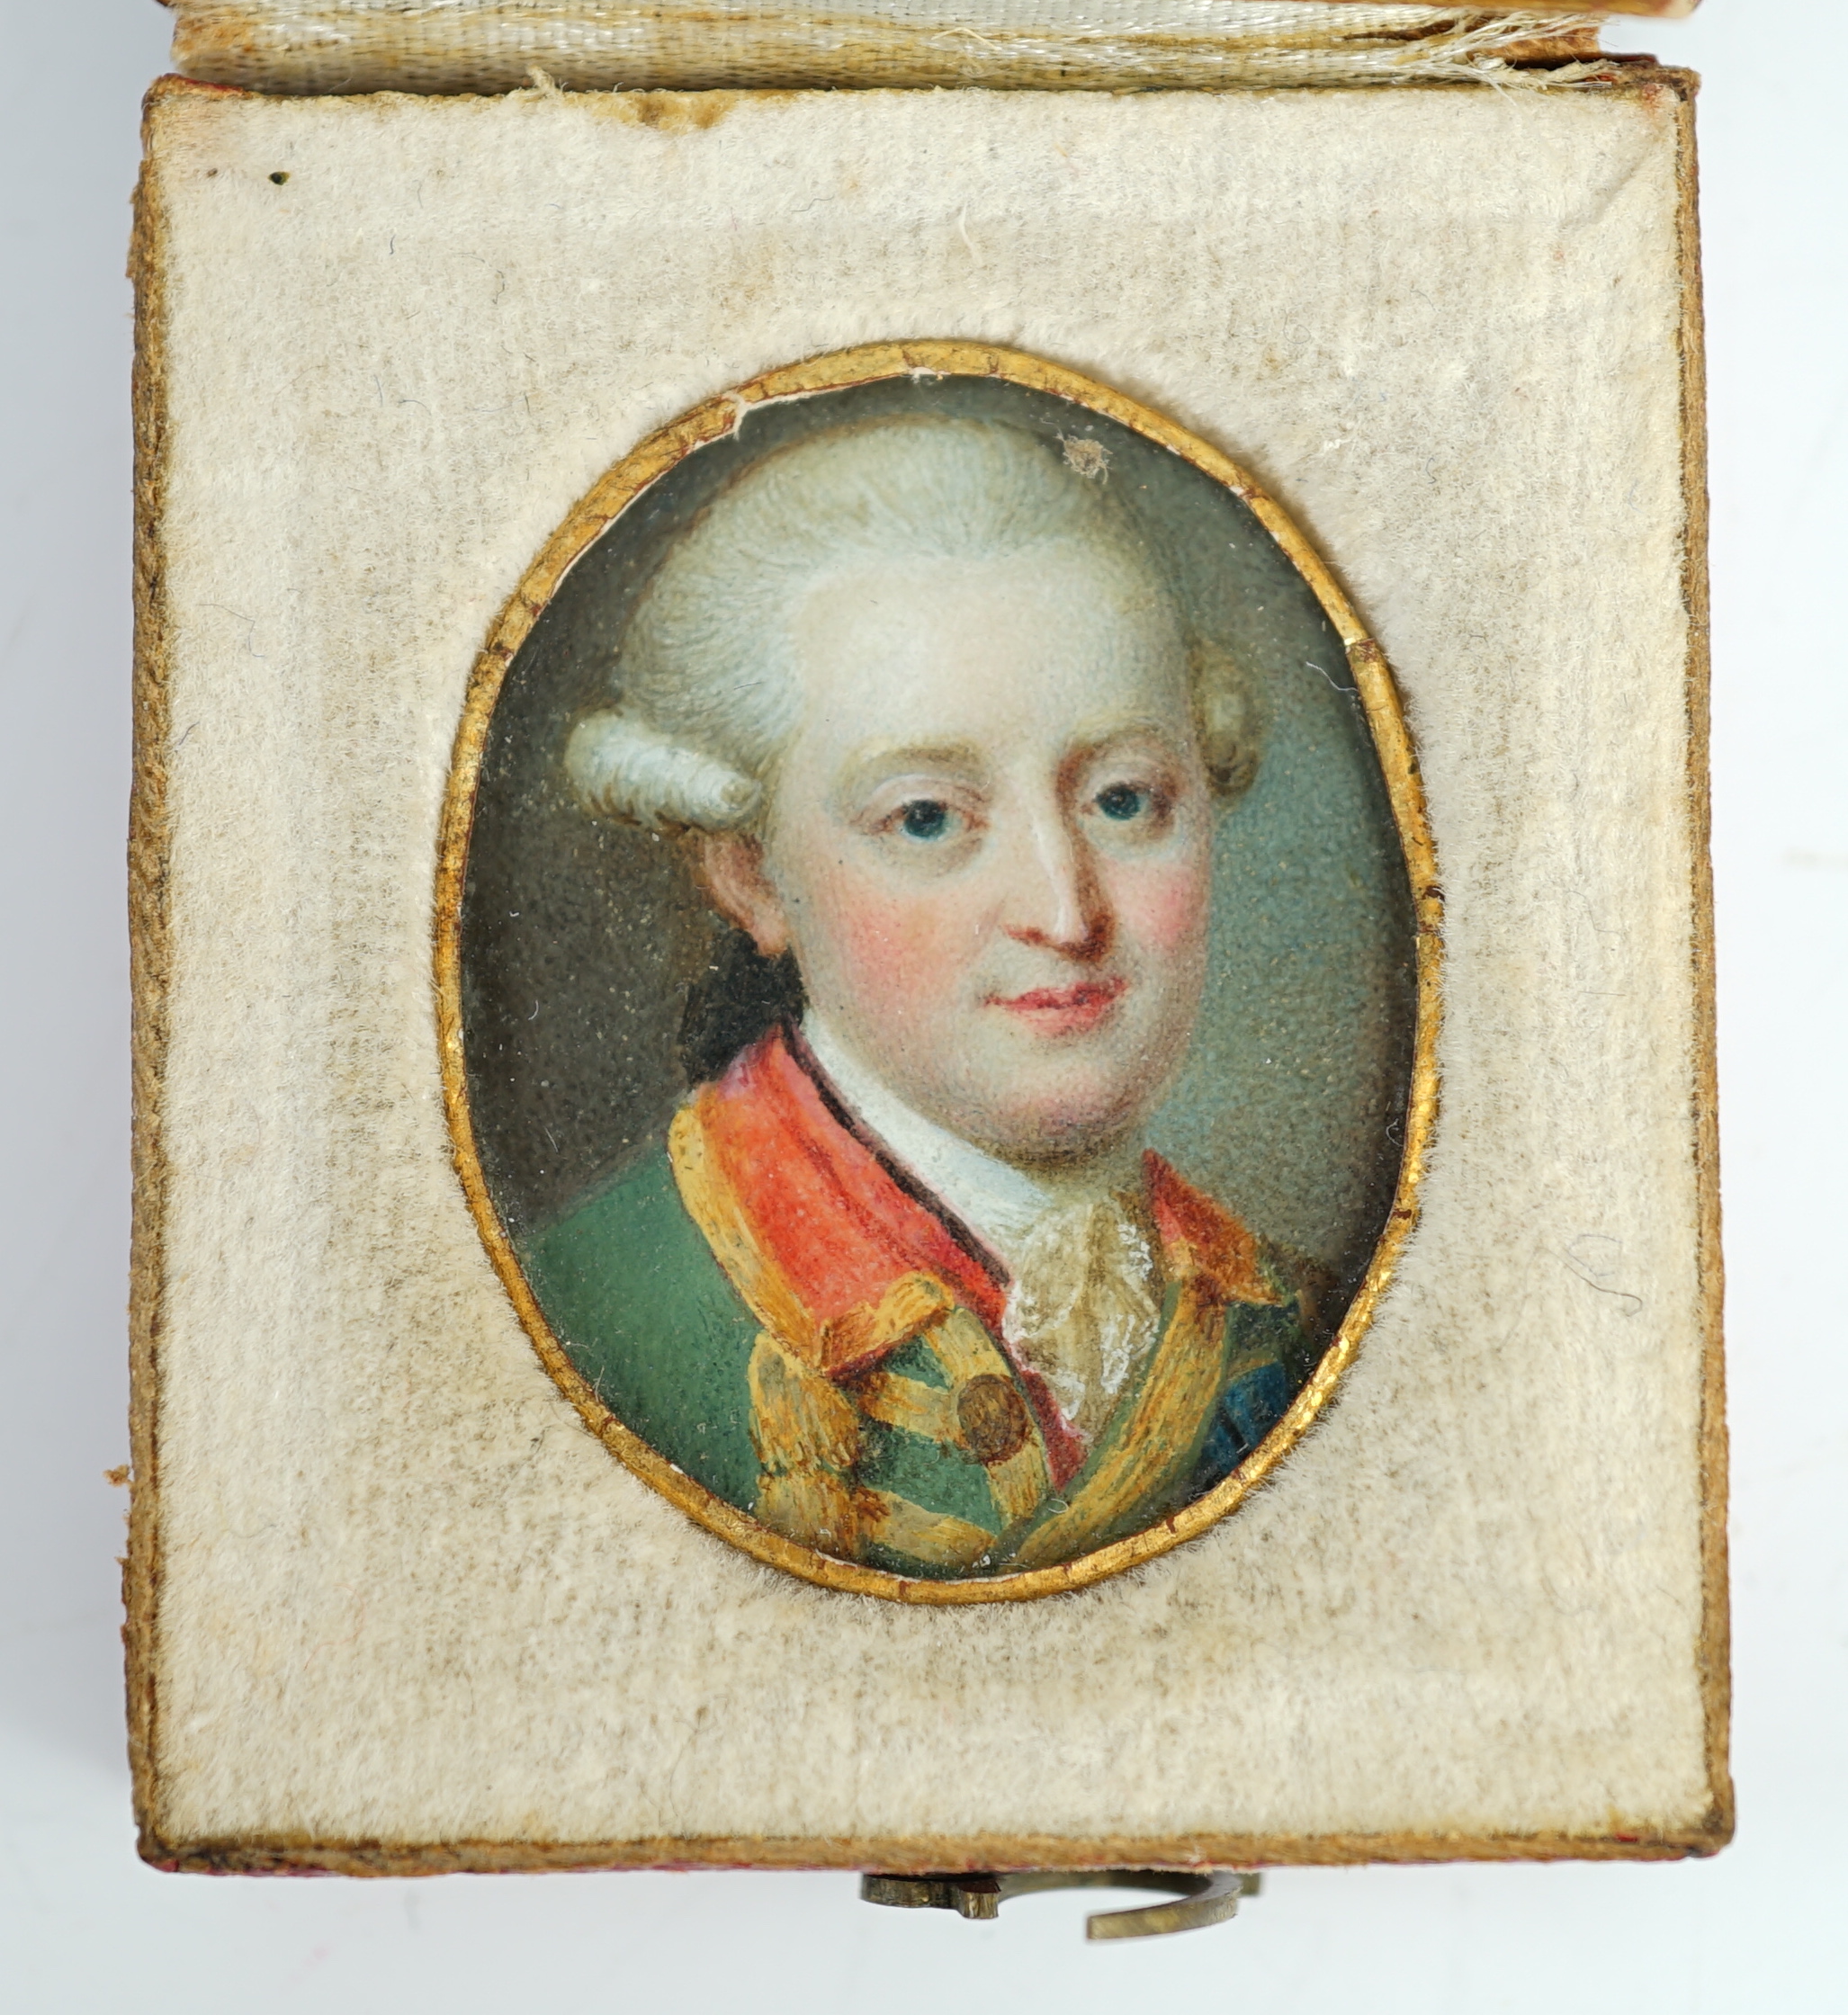 French School circa 1780, Portrait miniature of a gentleman wearing a gold brocaded green jacket, watercolour on ivory, 2.5 x 2cm, red leather case. CITES Submission reference GHZLAP5D